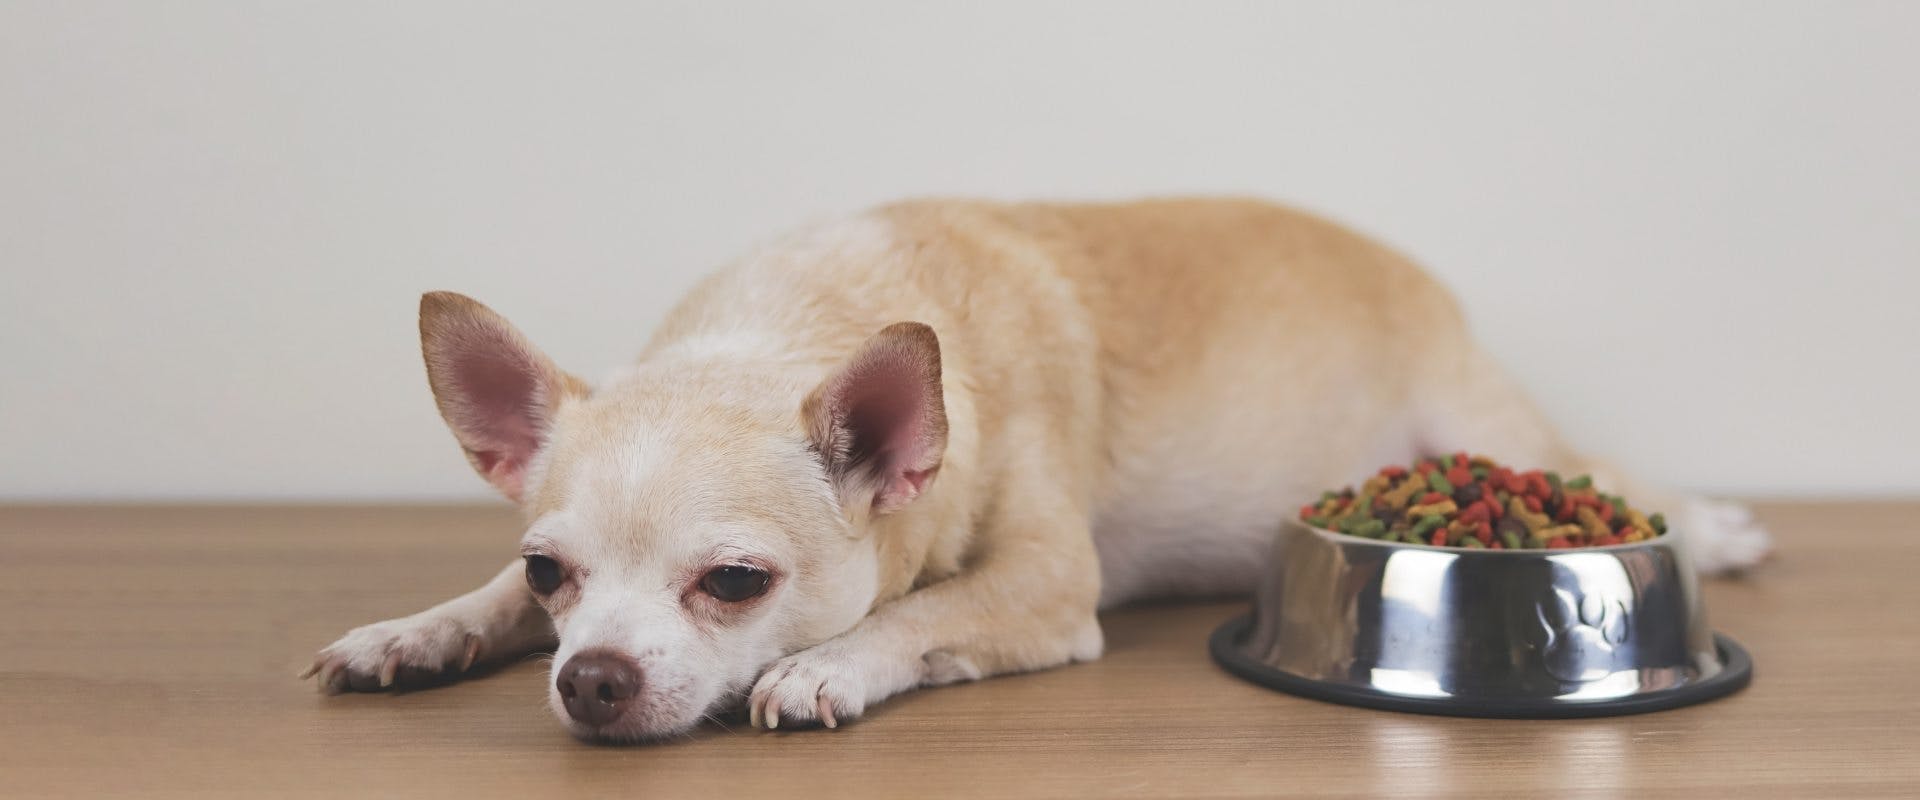 Chihuahua dog lying by their food and refusing to eat.